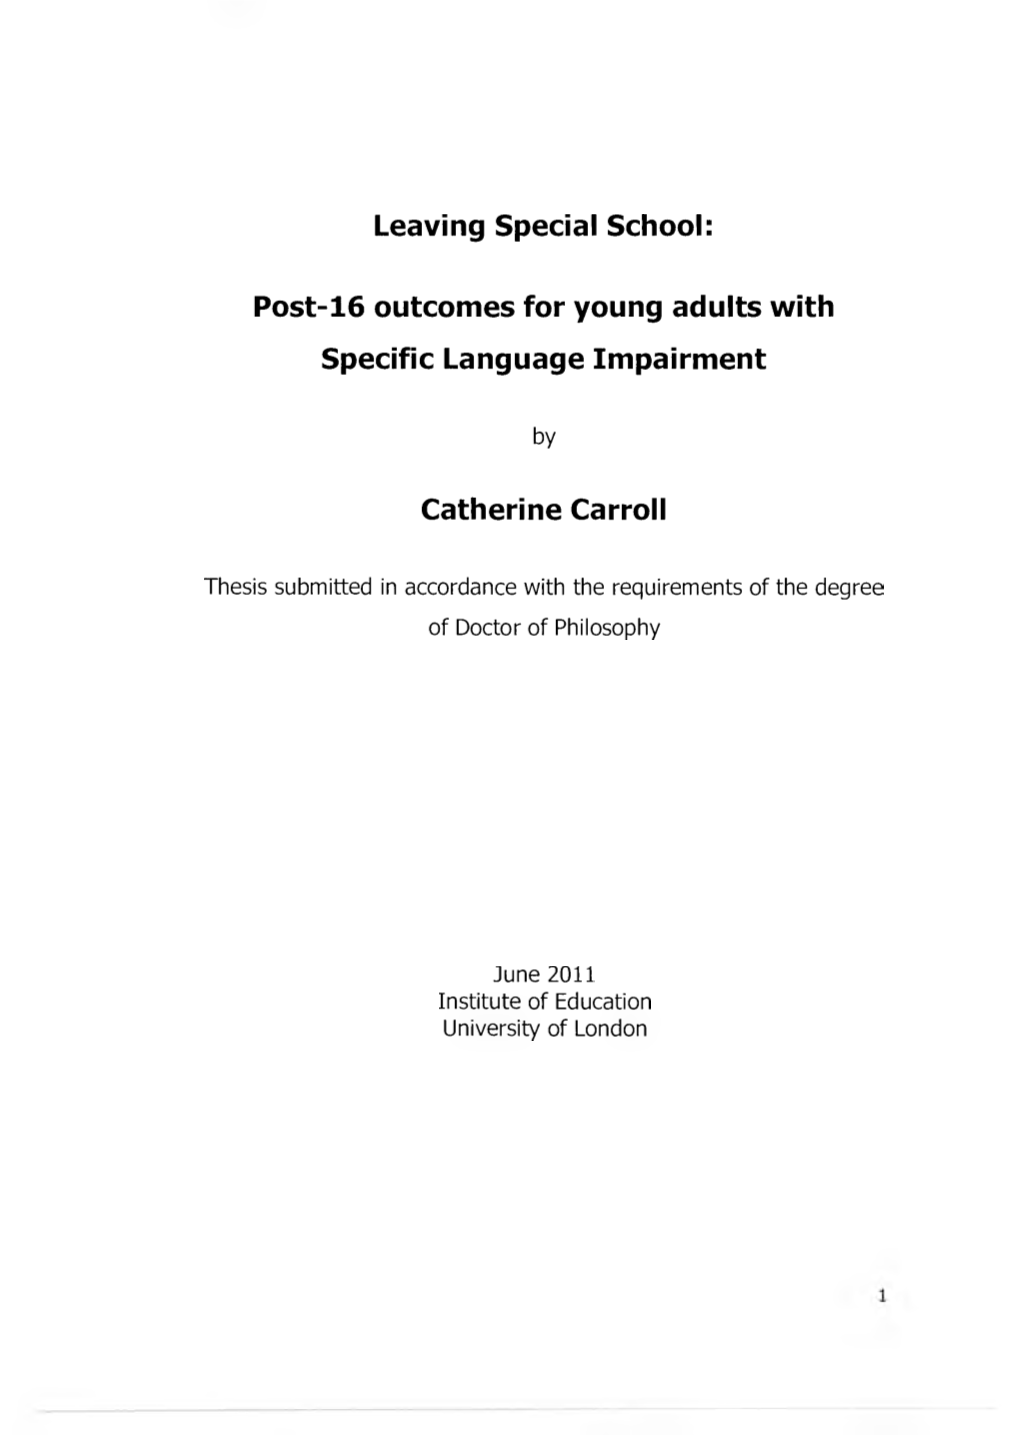 Leaving Special School: Post-16 Outcomes for Young Adults with Specific Language Impairment